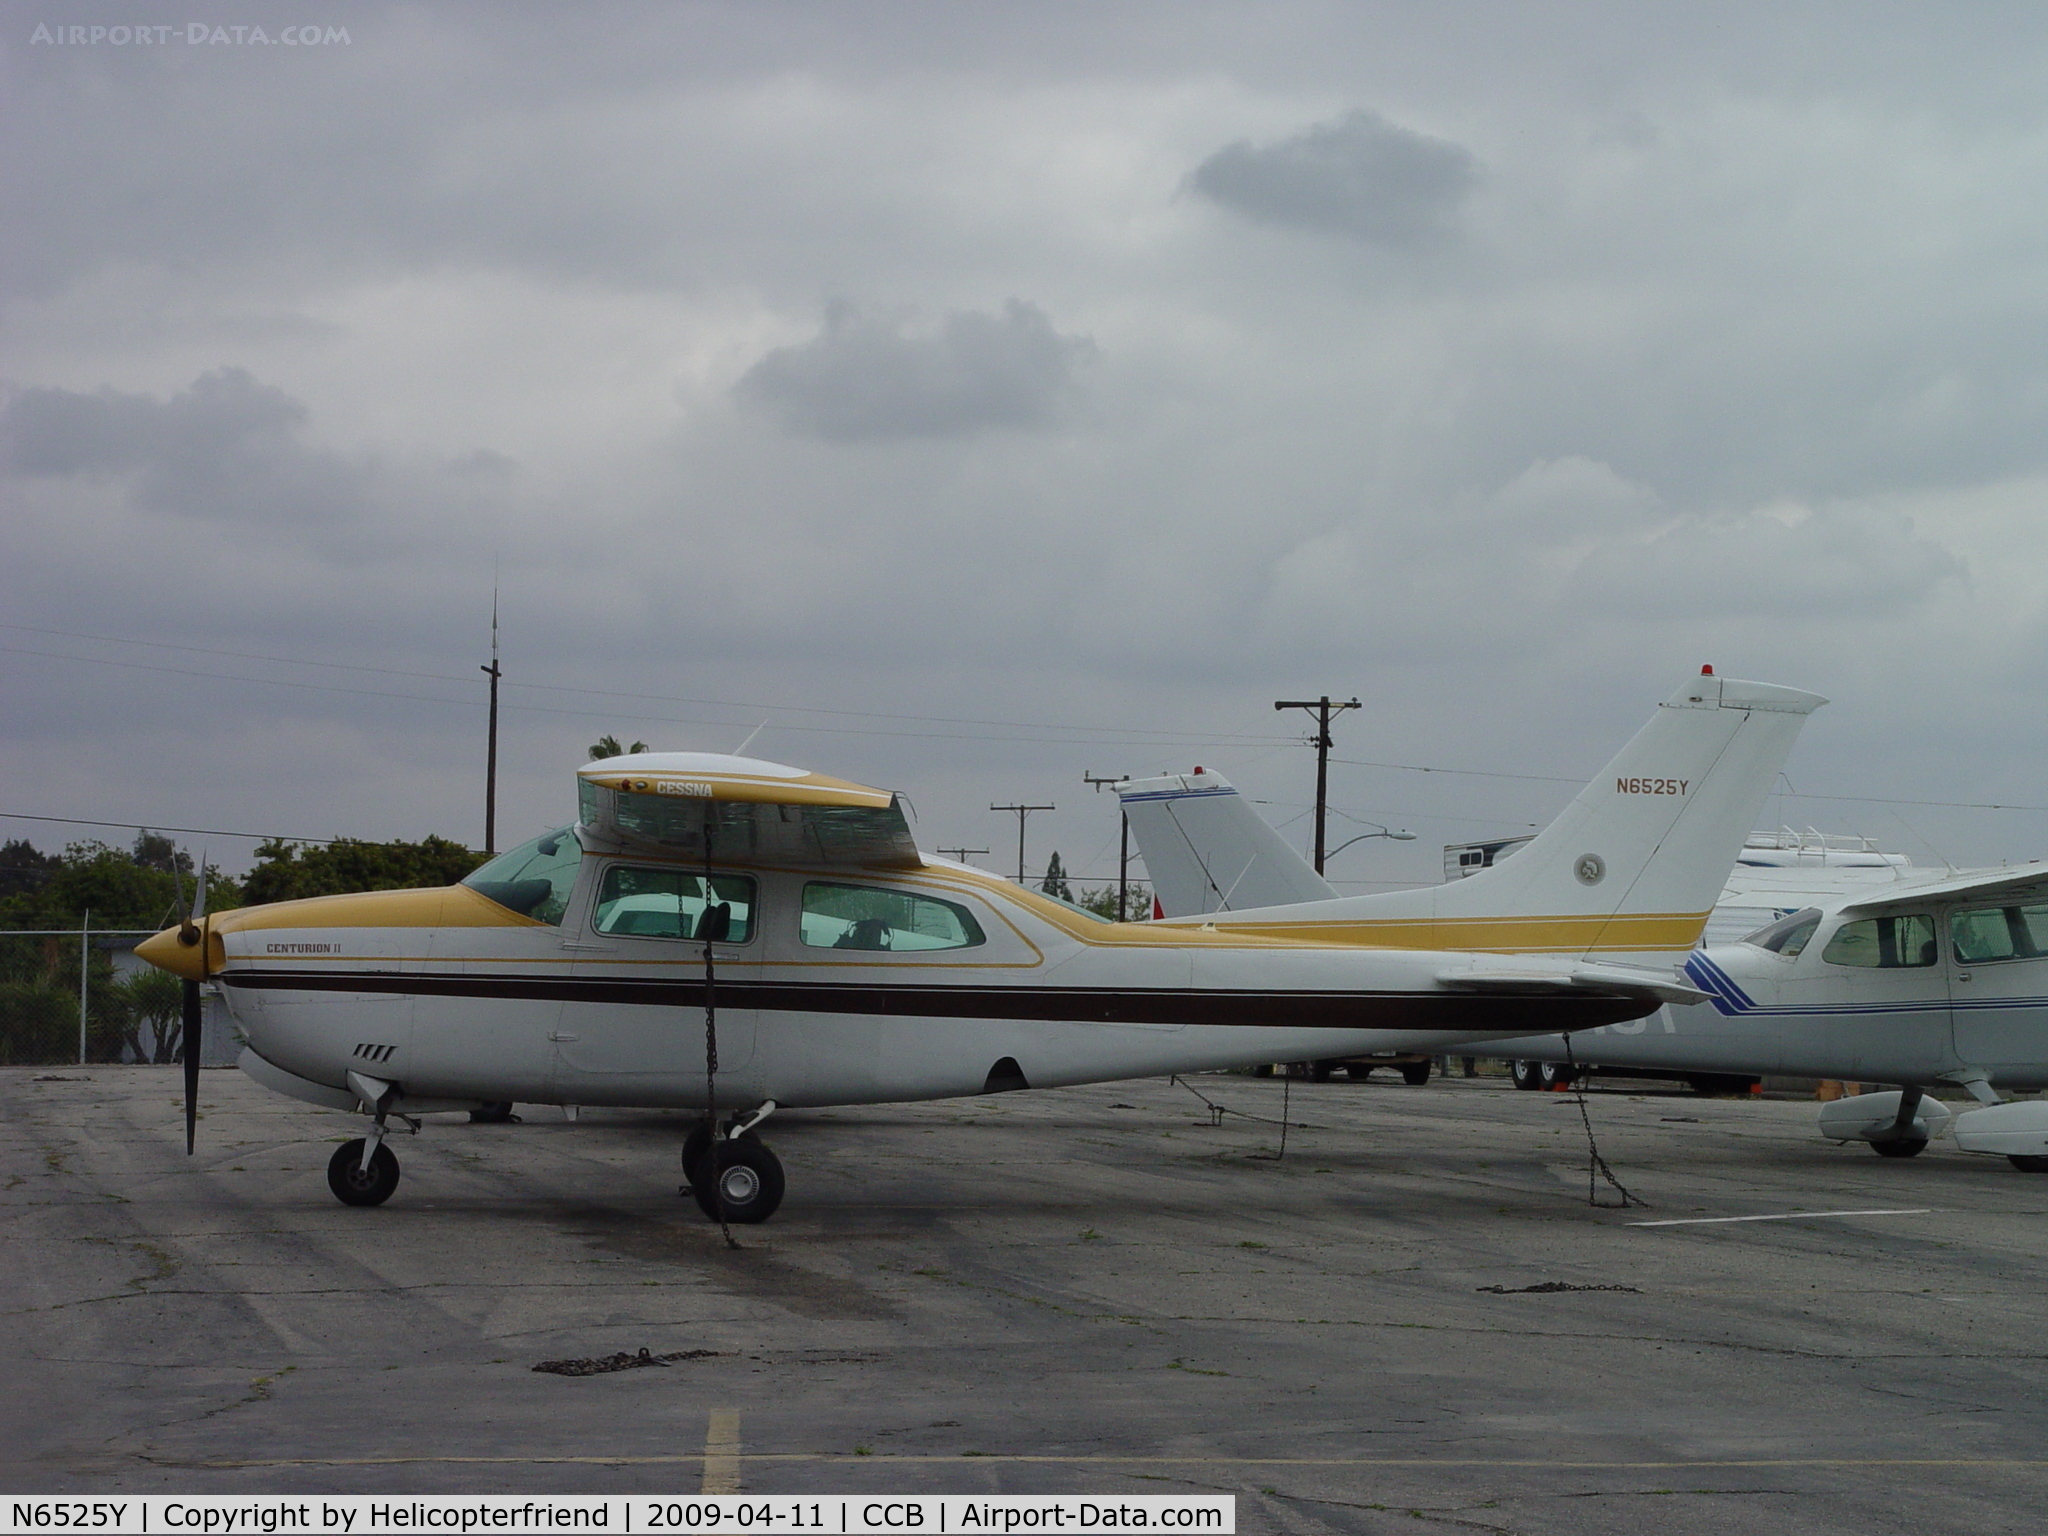 N6525Y, 1981 Cessna T210N Turbo Centurion C/N 21064420, Parked at Cable waiting to be checked out